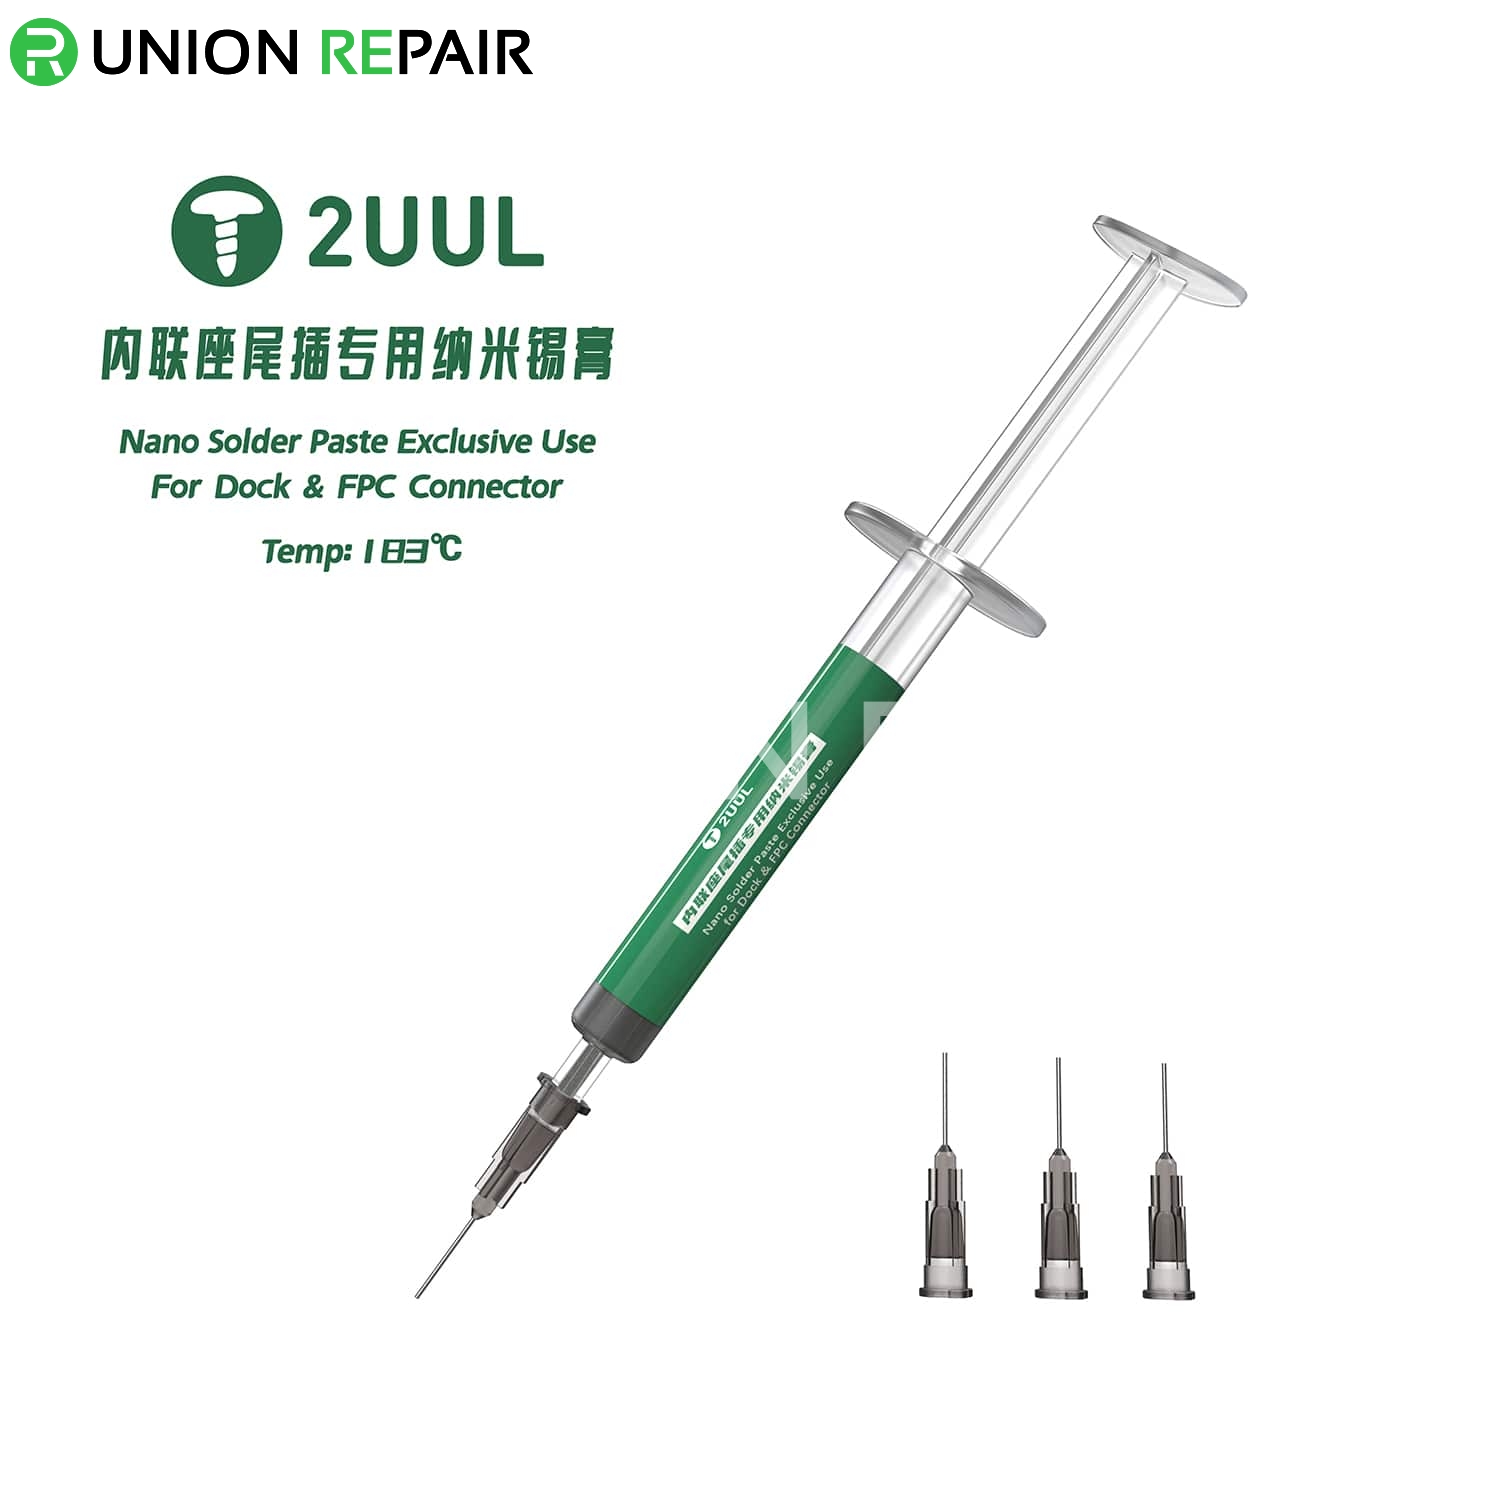 2UUL Nano Solder Paste Exclusive Use for Dock&FPC Connector